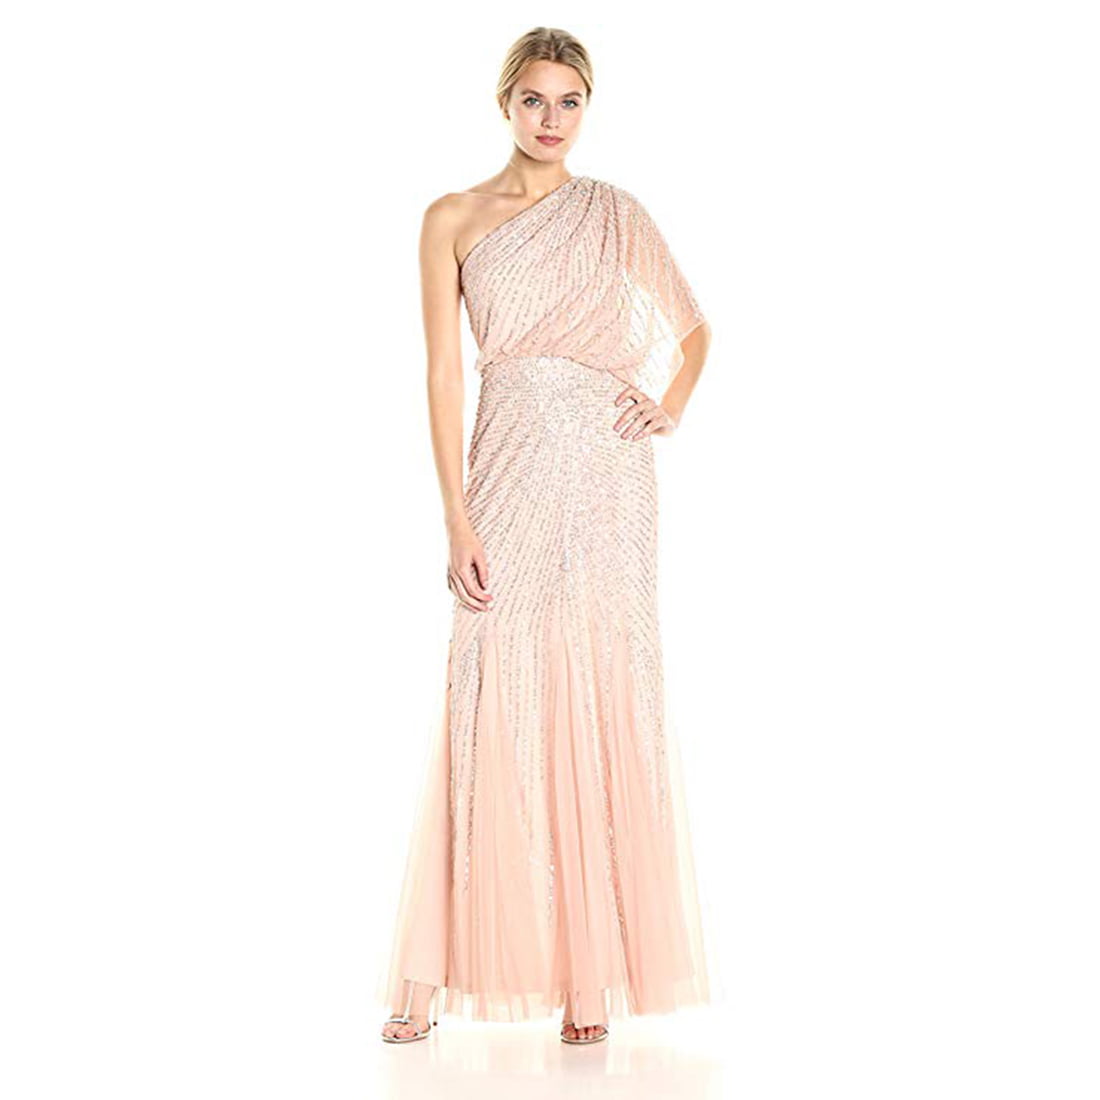 Adrianna Papell NEW Coral Pink Womens Size 4 Tiered One Shoulder Gown $199 037 